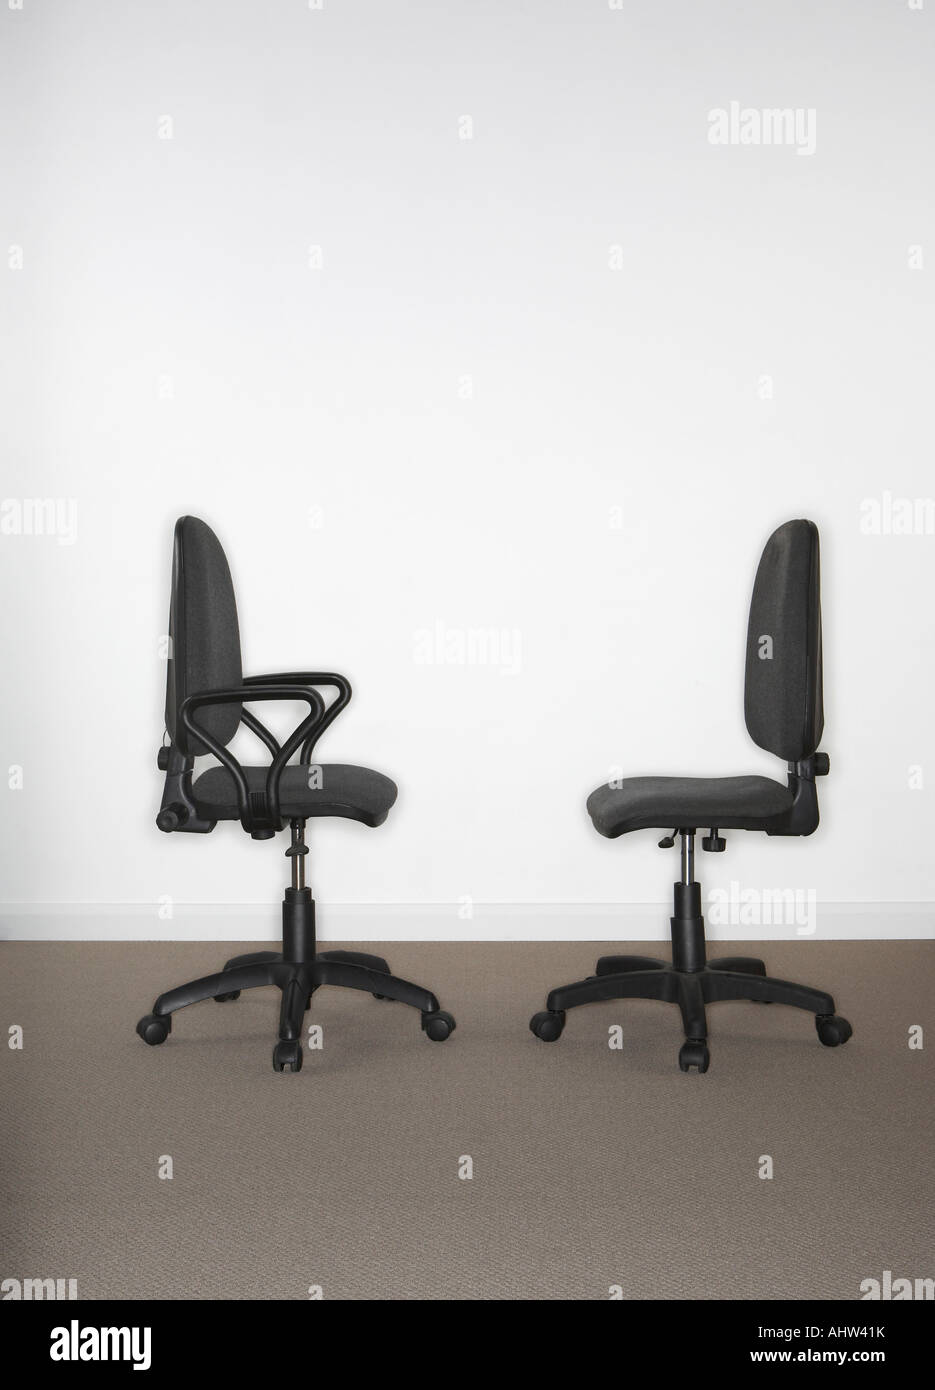 Two office chairs facing each other. Stock Photo